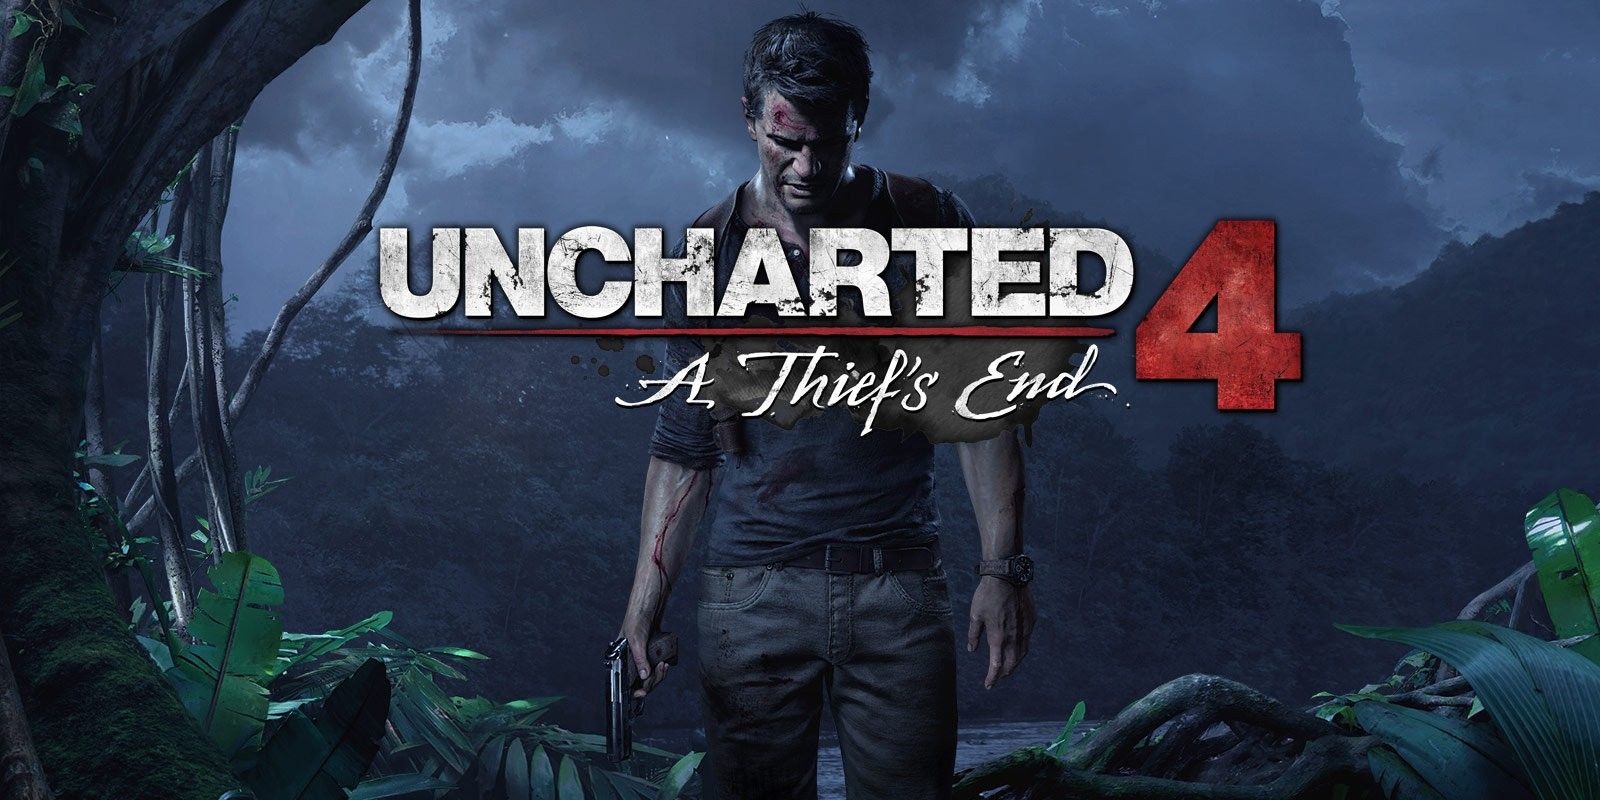 Nathan Drake in the poster for Uncharted 4: A Thief's End